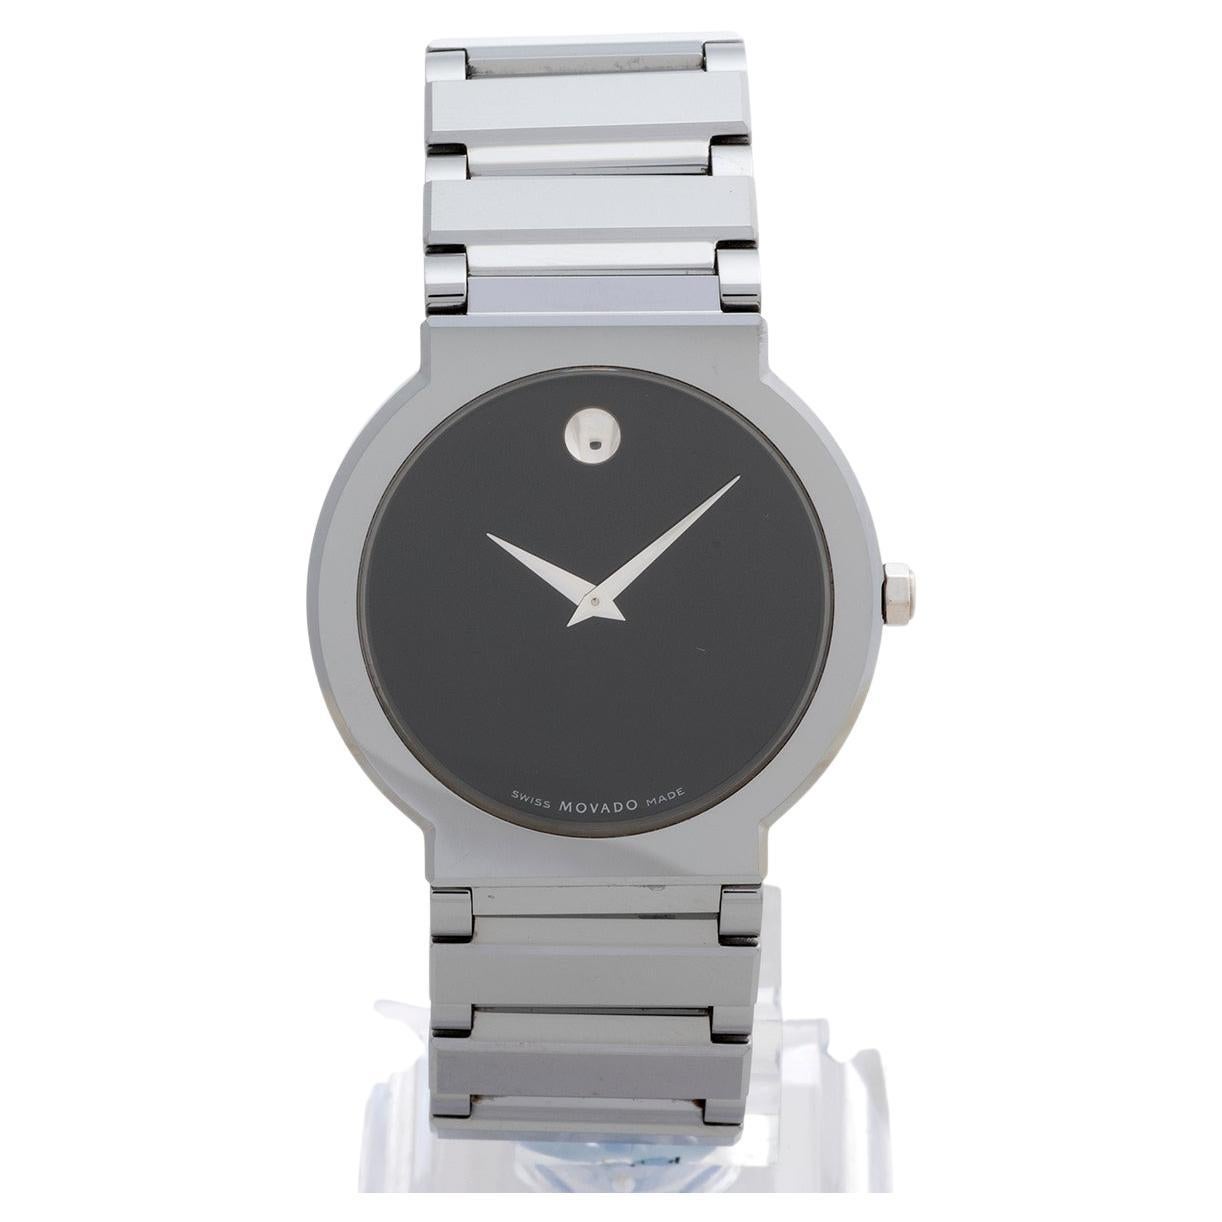 Our Movado Fiero features a 35mm Tungsten Carbide and stainless steel case with tungsten carbide and stainless steel bracelet, a rare and desirable reference 89.C6.1871. Presented in outstanding condition with little signs os use from new, this